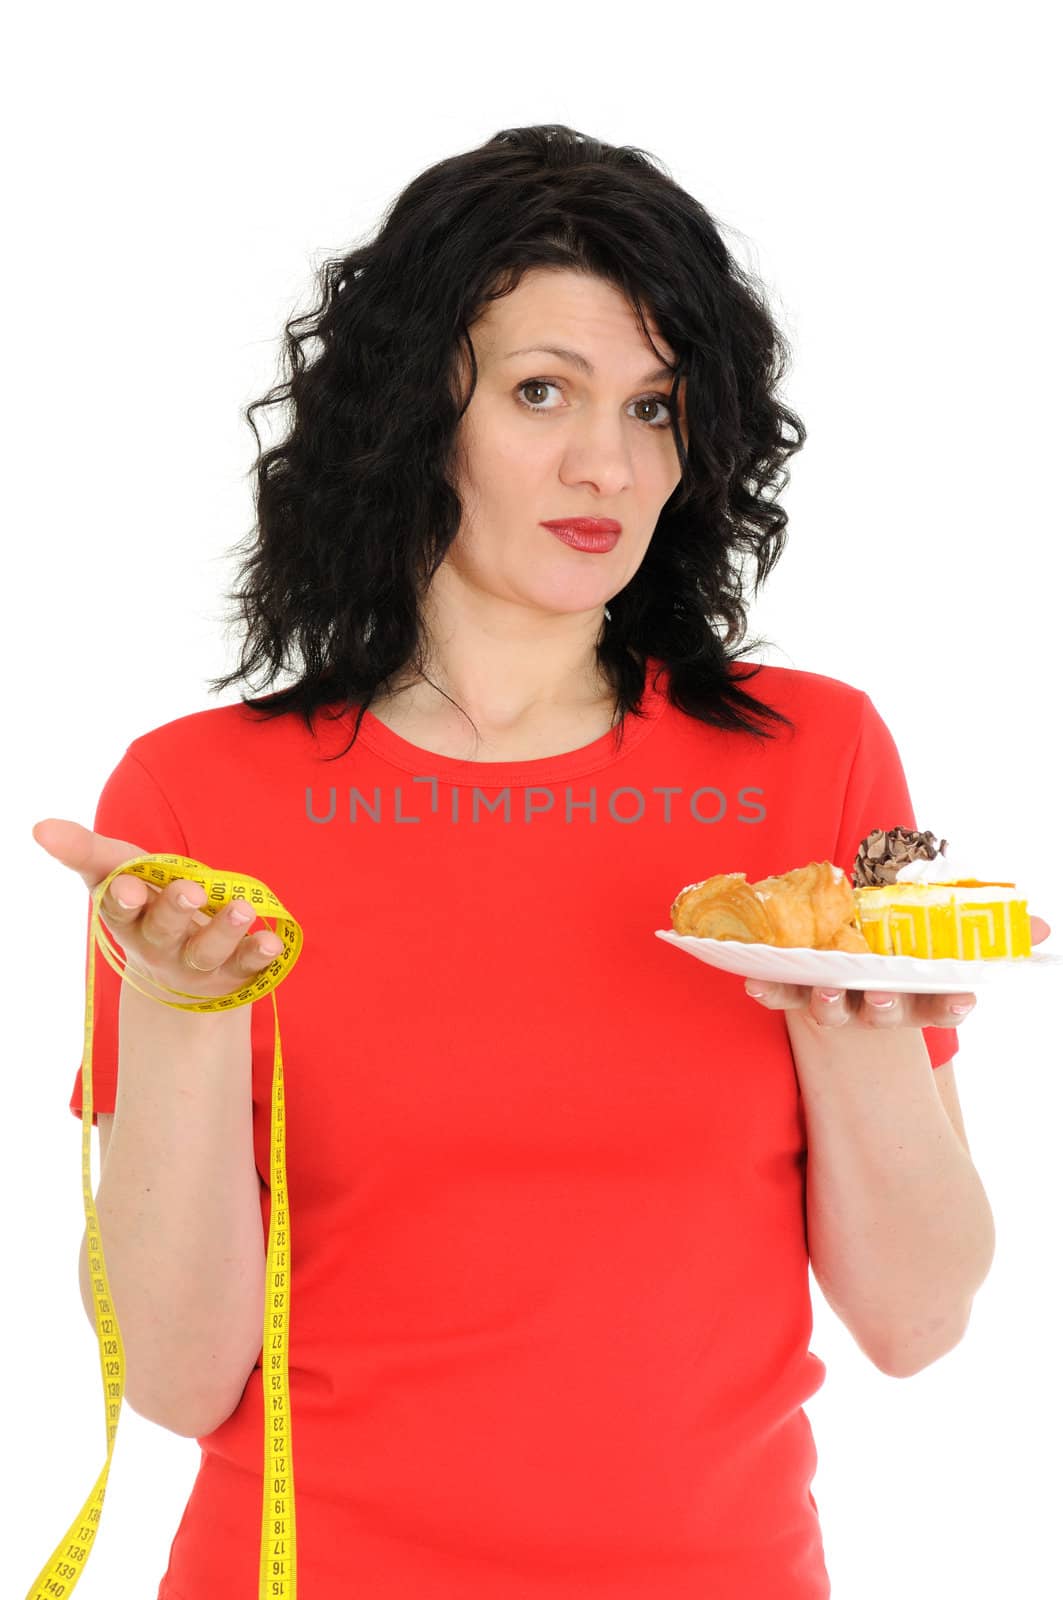 woman with cake and measuring tape isolated on white background